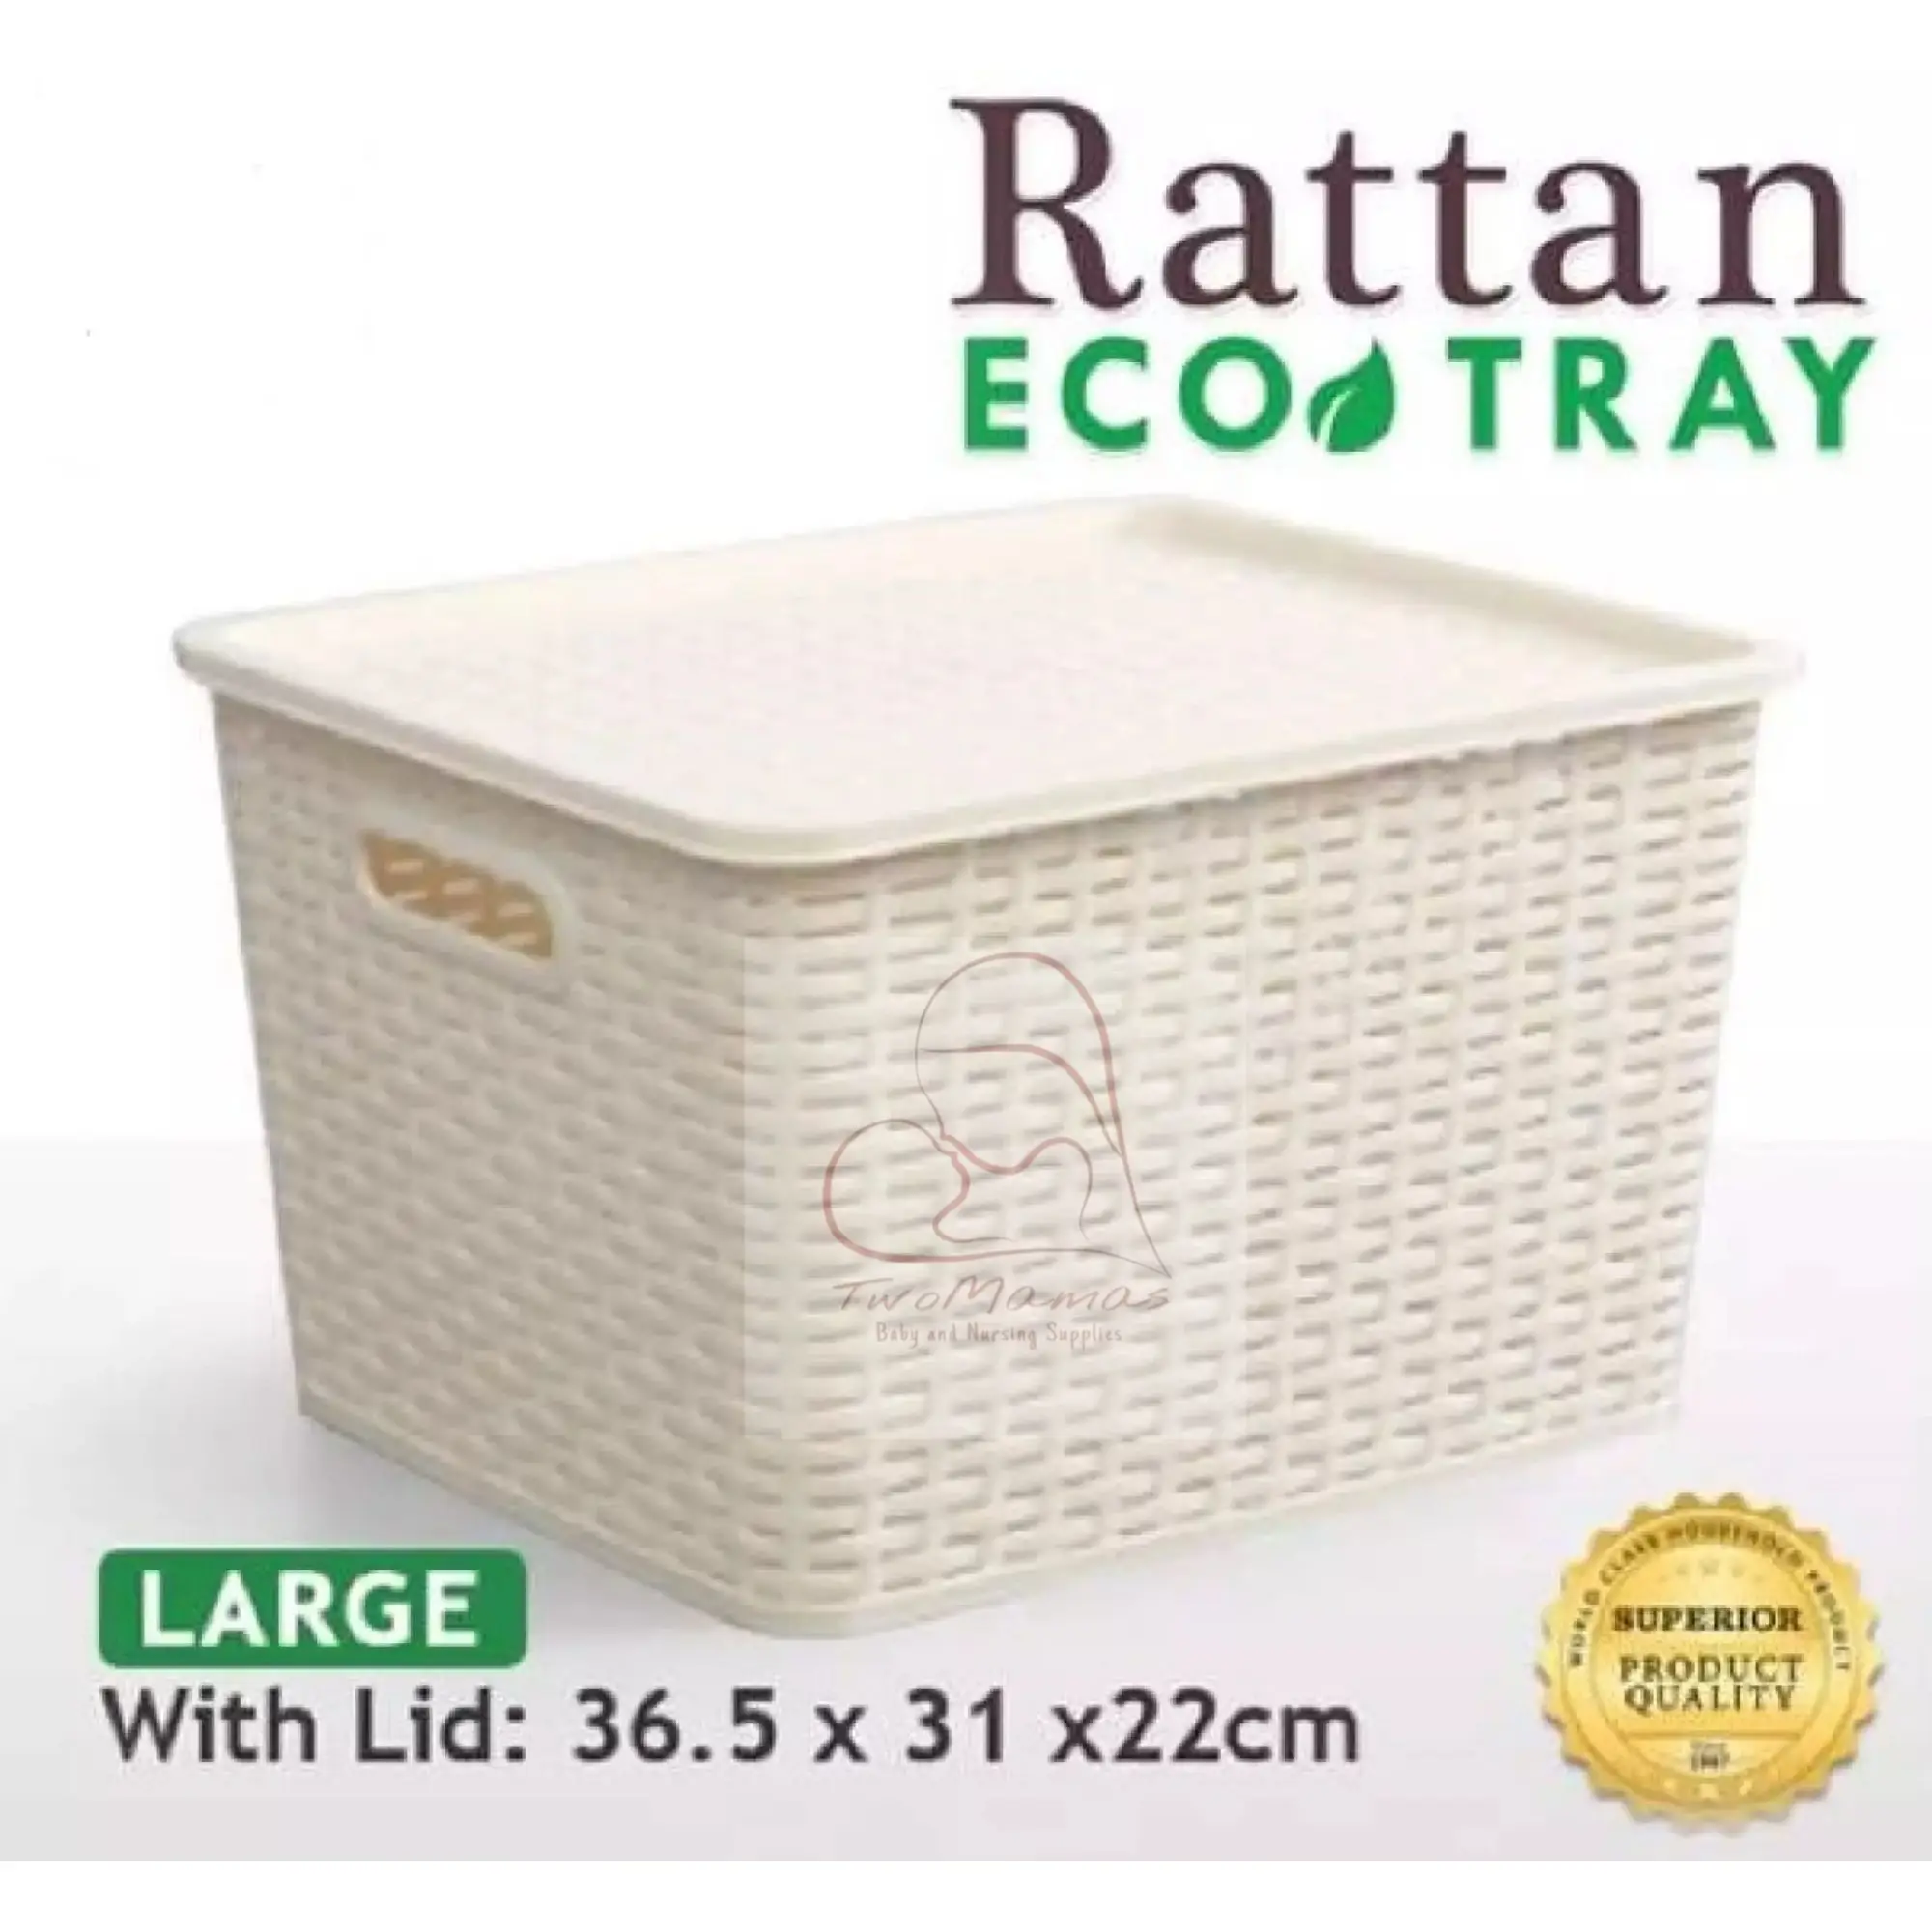 Zooey Rattan Eco Tray Large with Lid